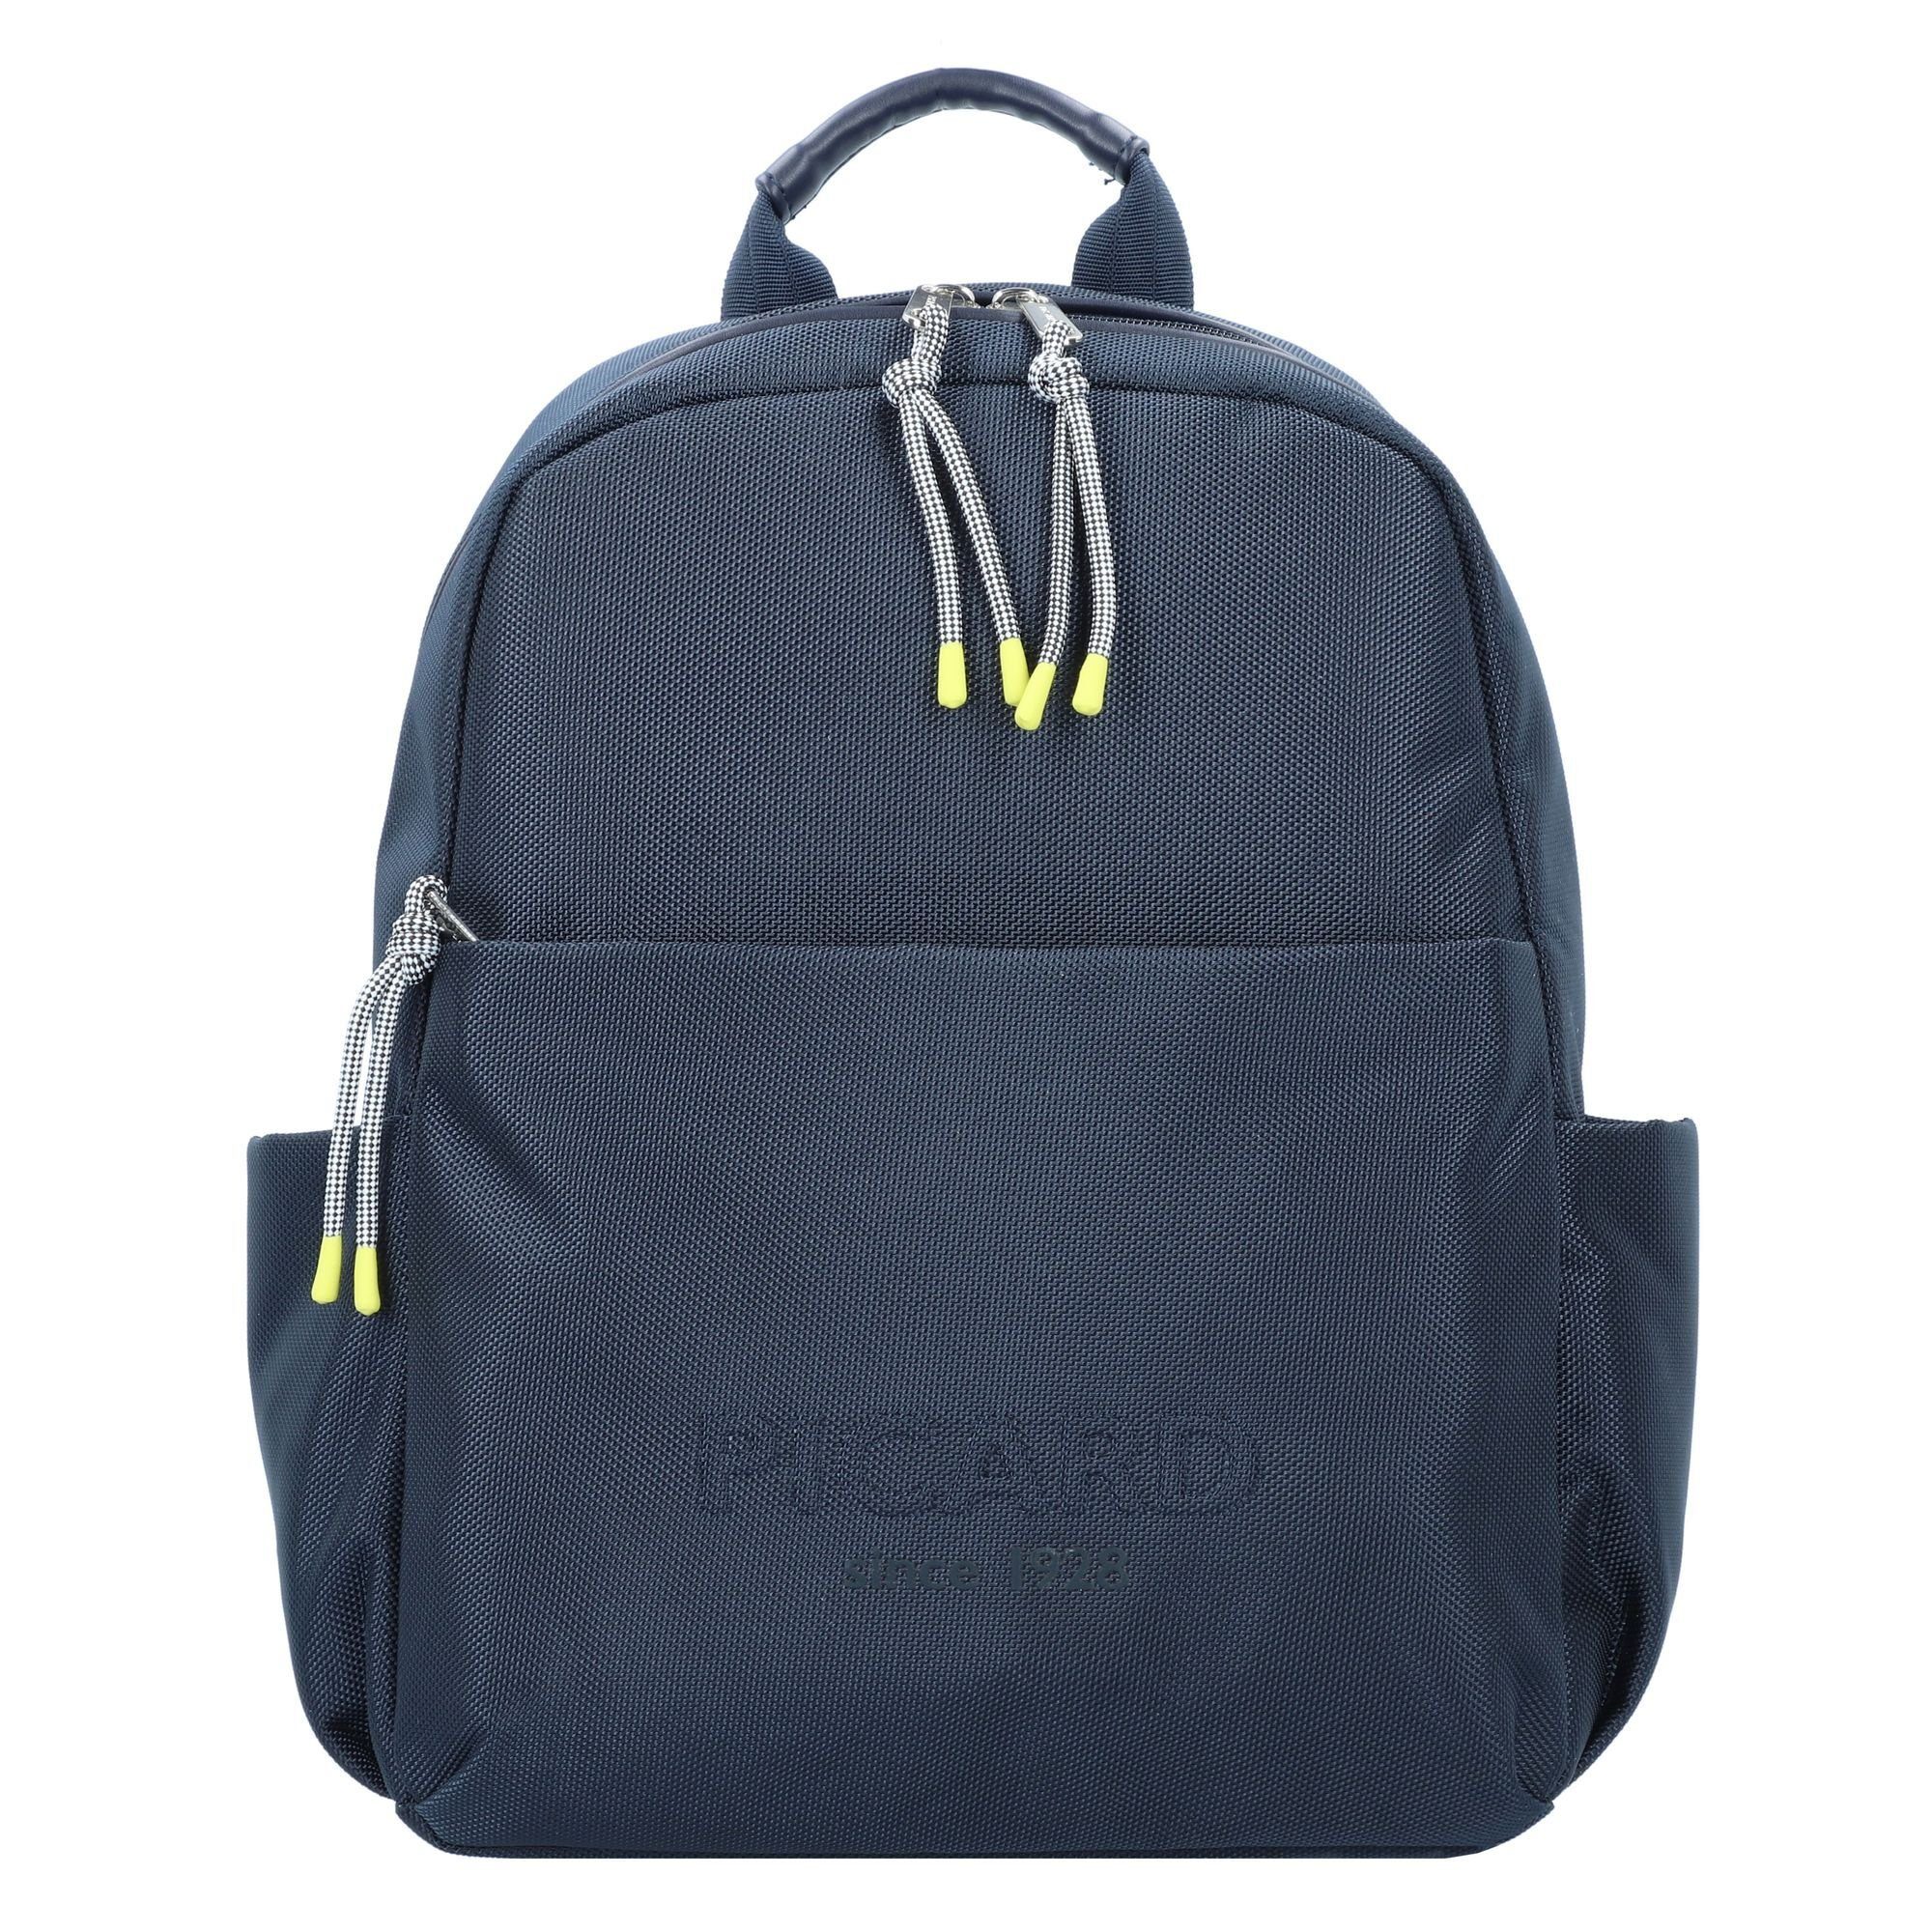 Picard Daypack Lucky one, Nylon navy